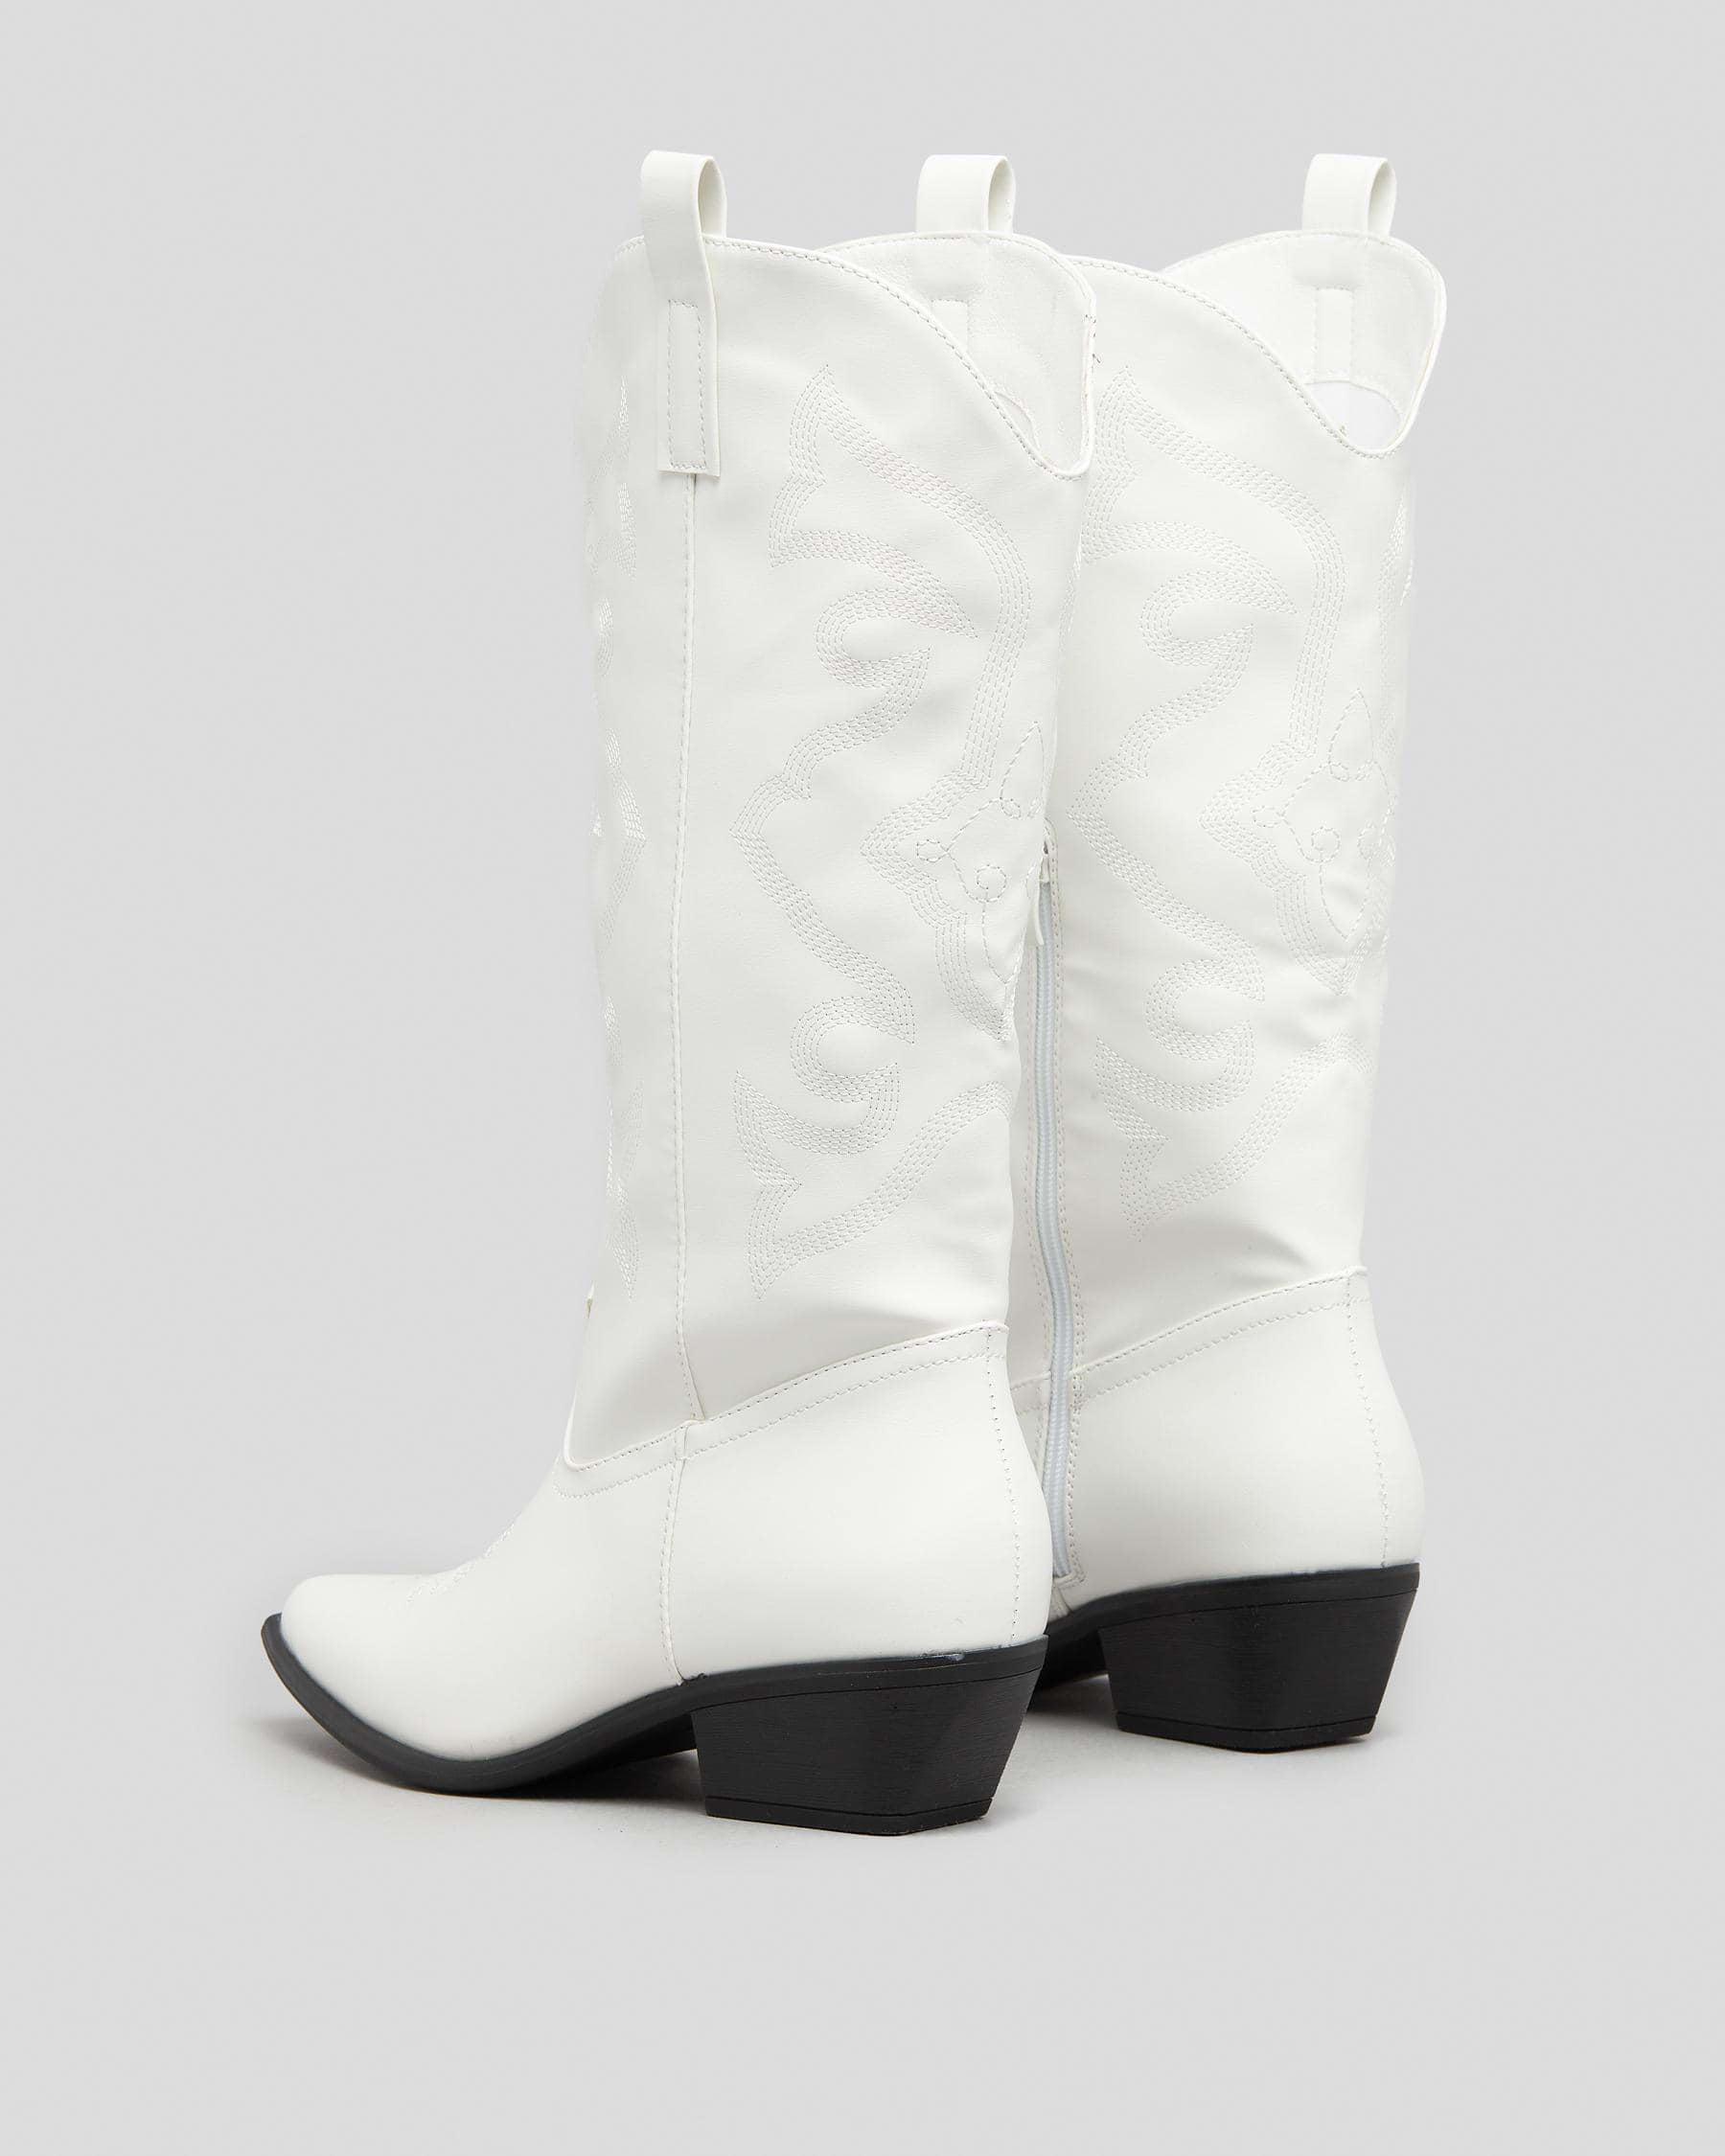 Ava And Ever Dallas Boots In White - Fast Shipping & Easy Returns ...